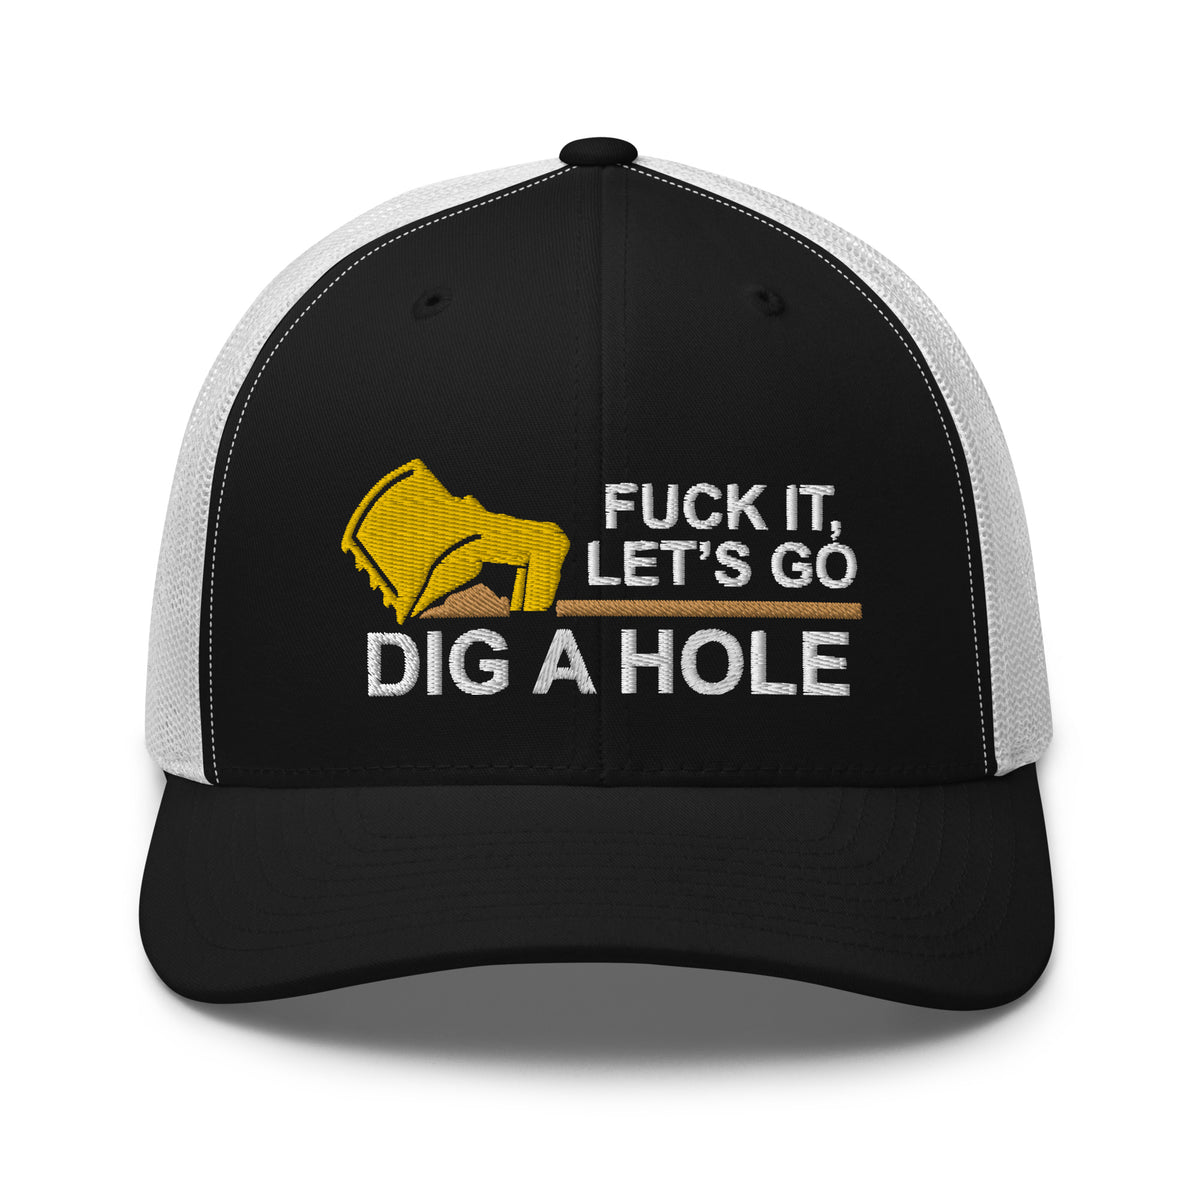 Fuck It. Let's Go Dig a Hole - Excavator - Snapback Hat - Free Shipping